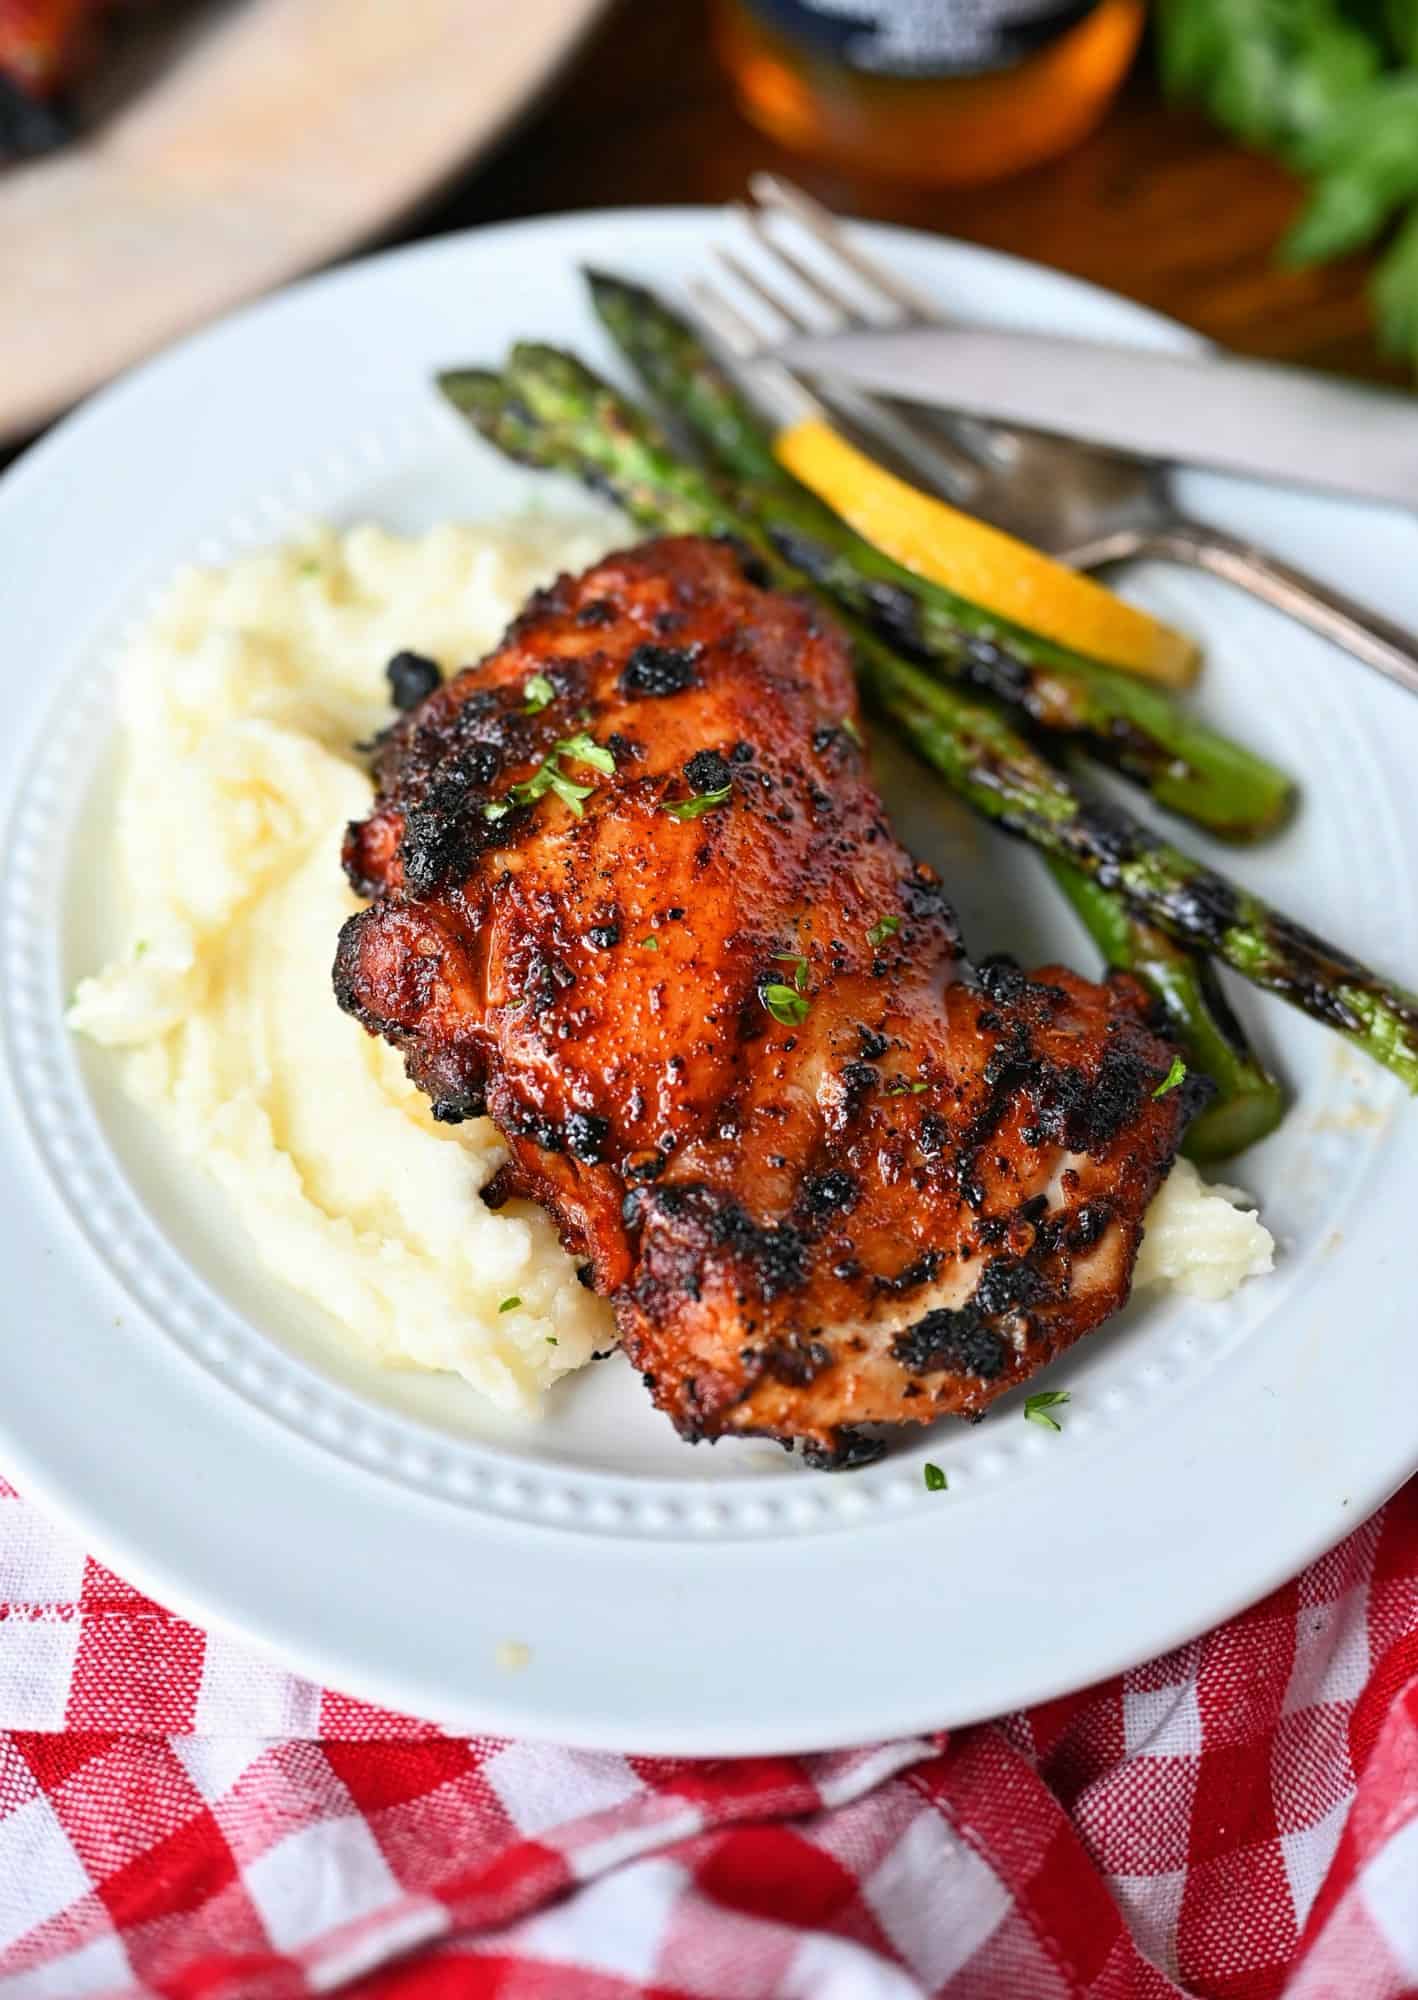 Sweet n spicy chicken on a white plate with mashed potatoes and grilled asparagus and a lemon slice.